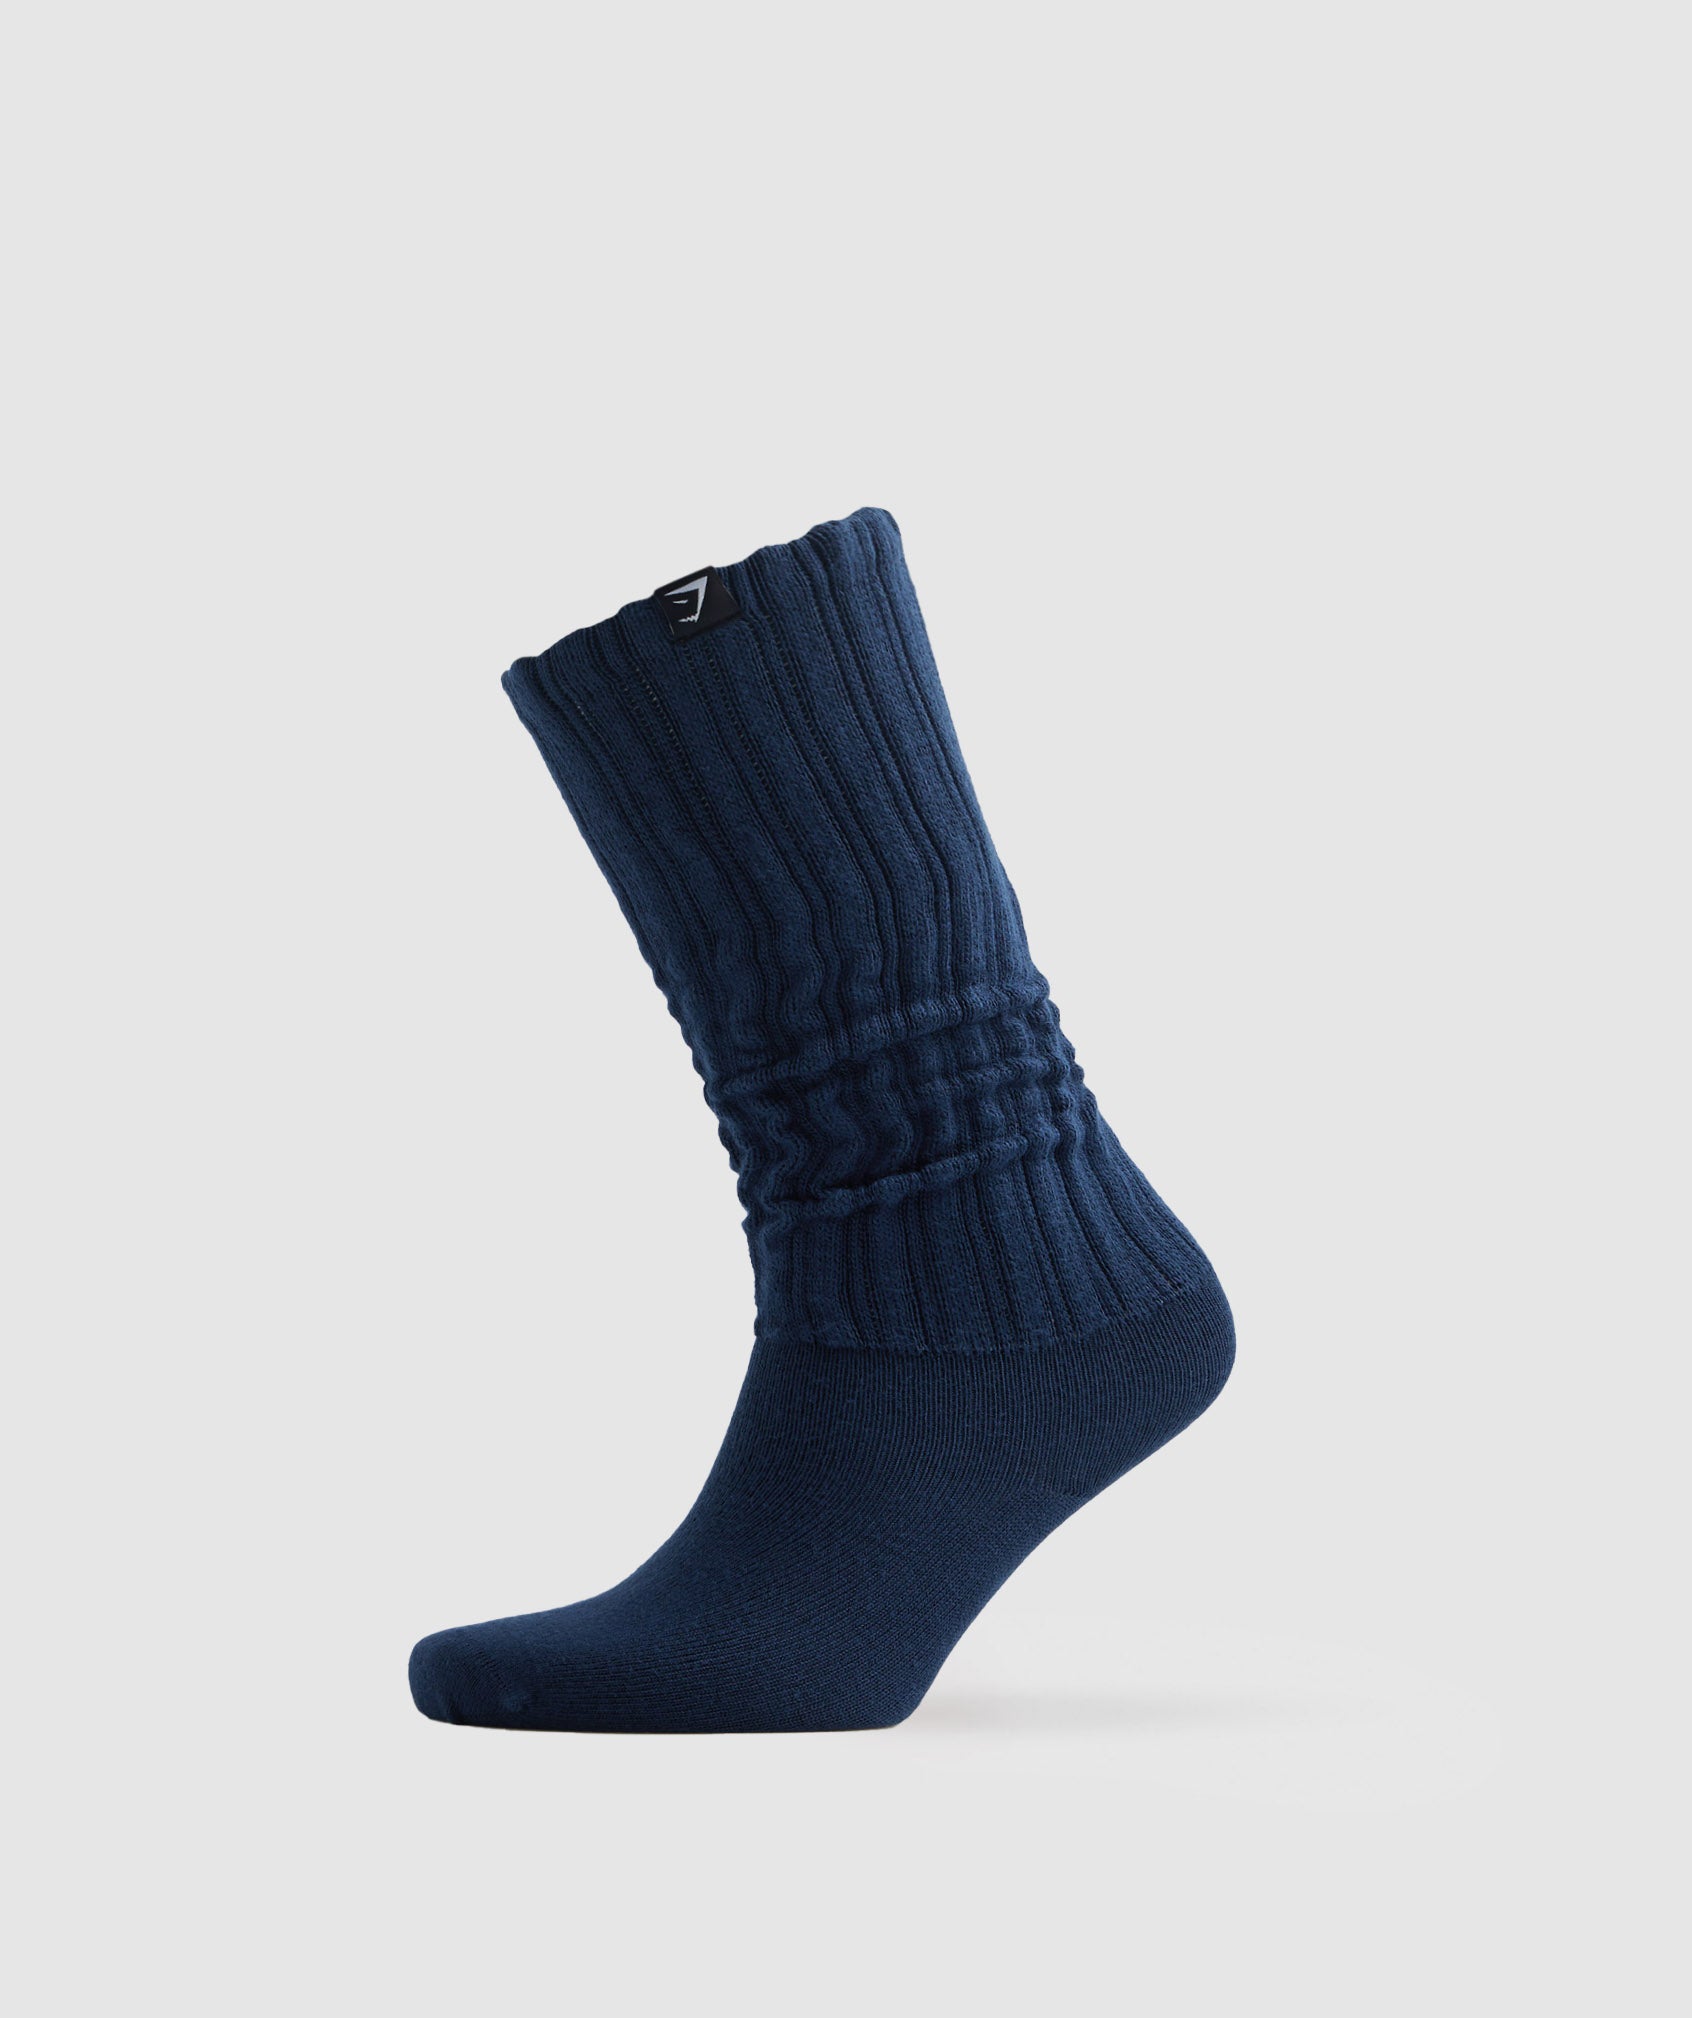 Comfy Rest Day Socks in Navy